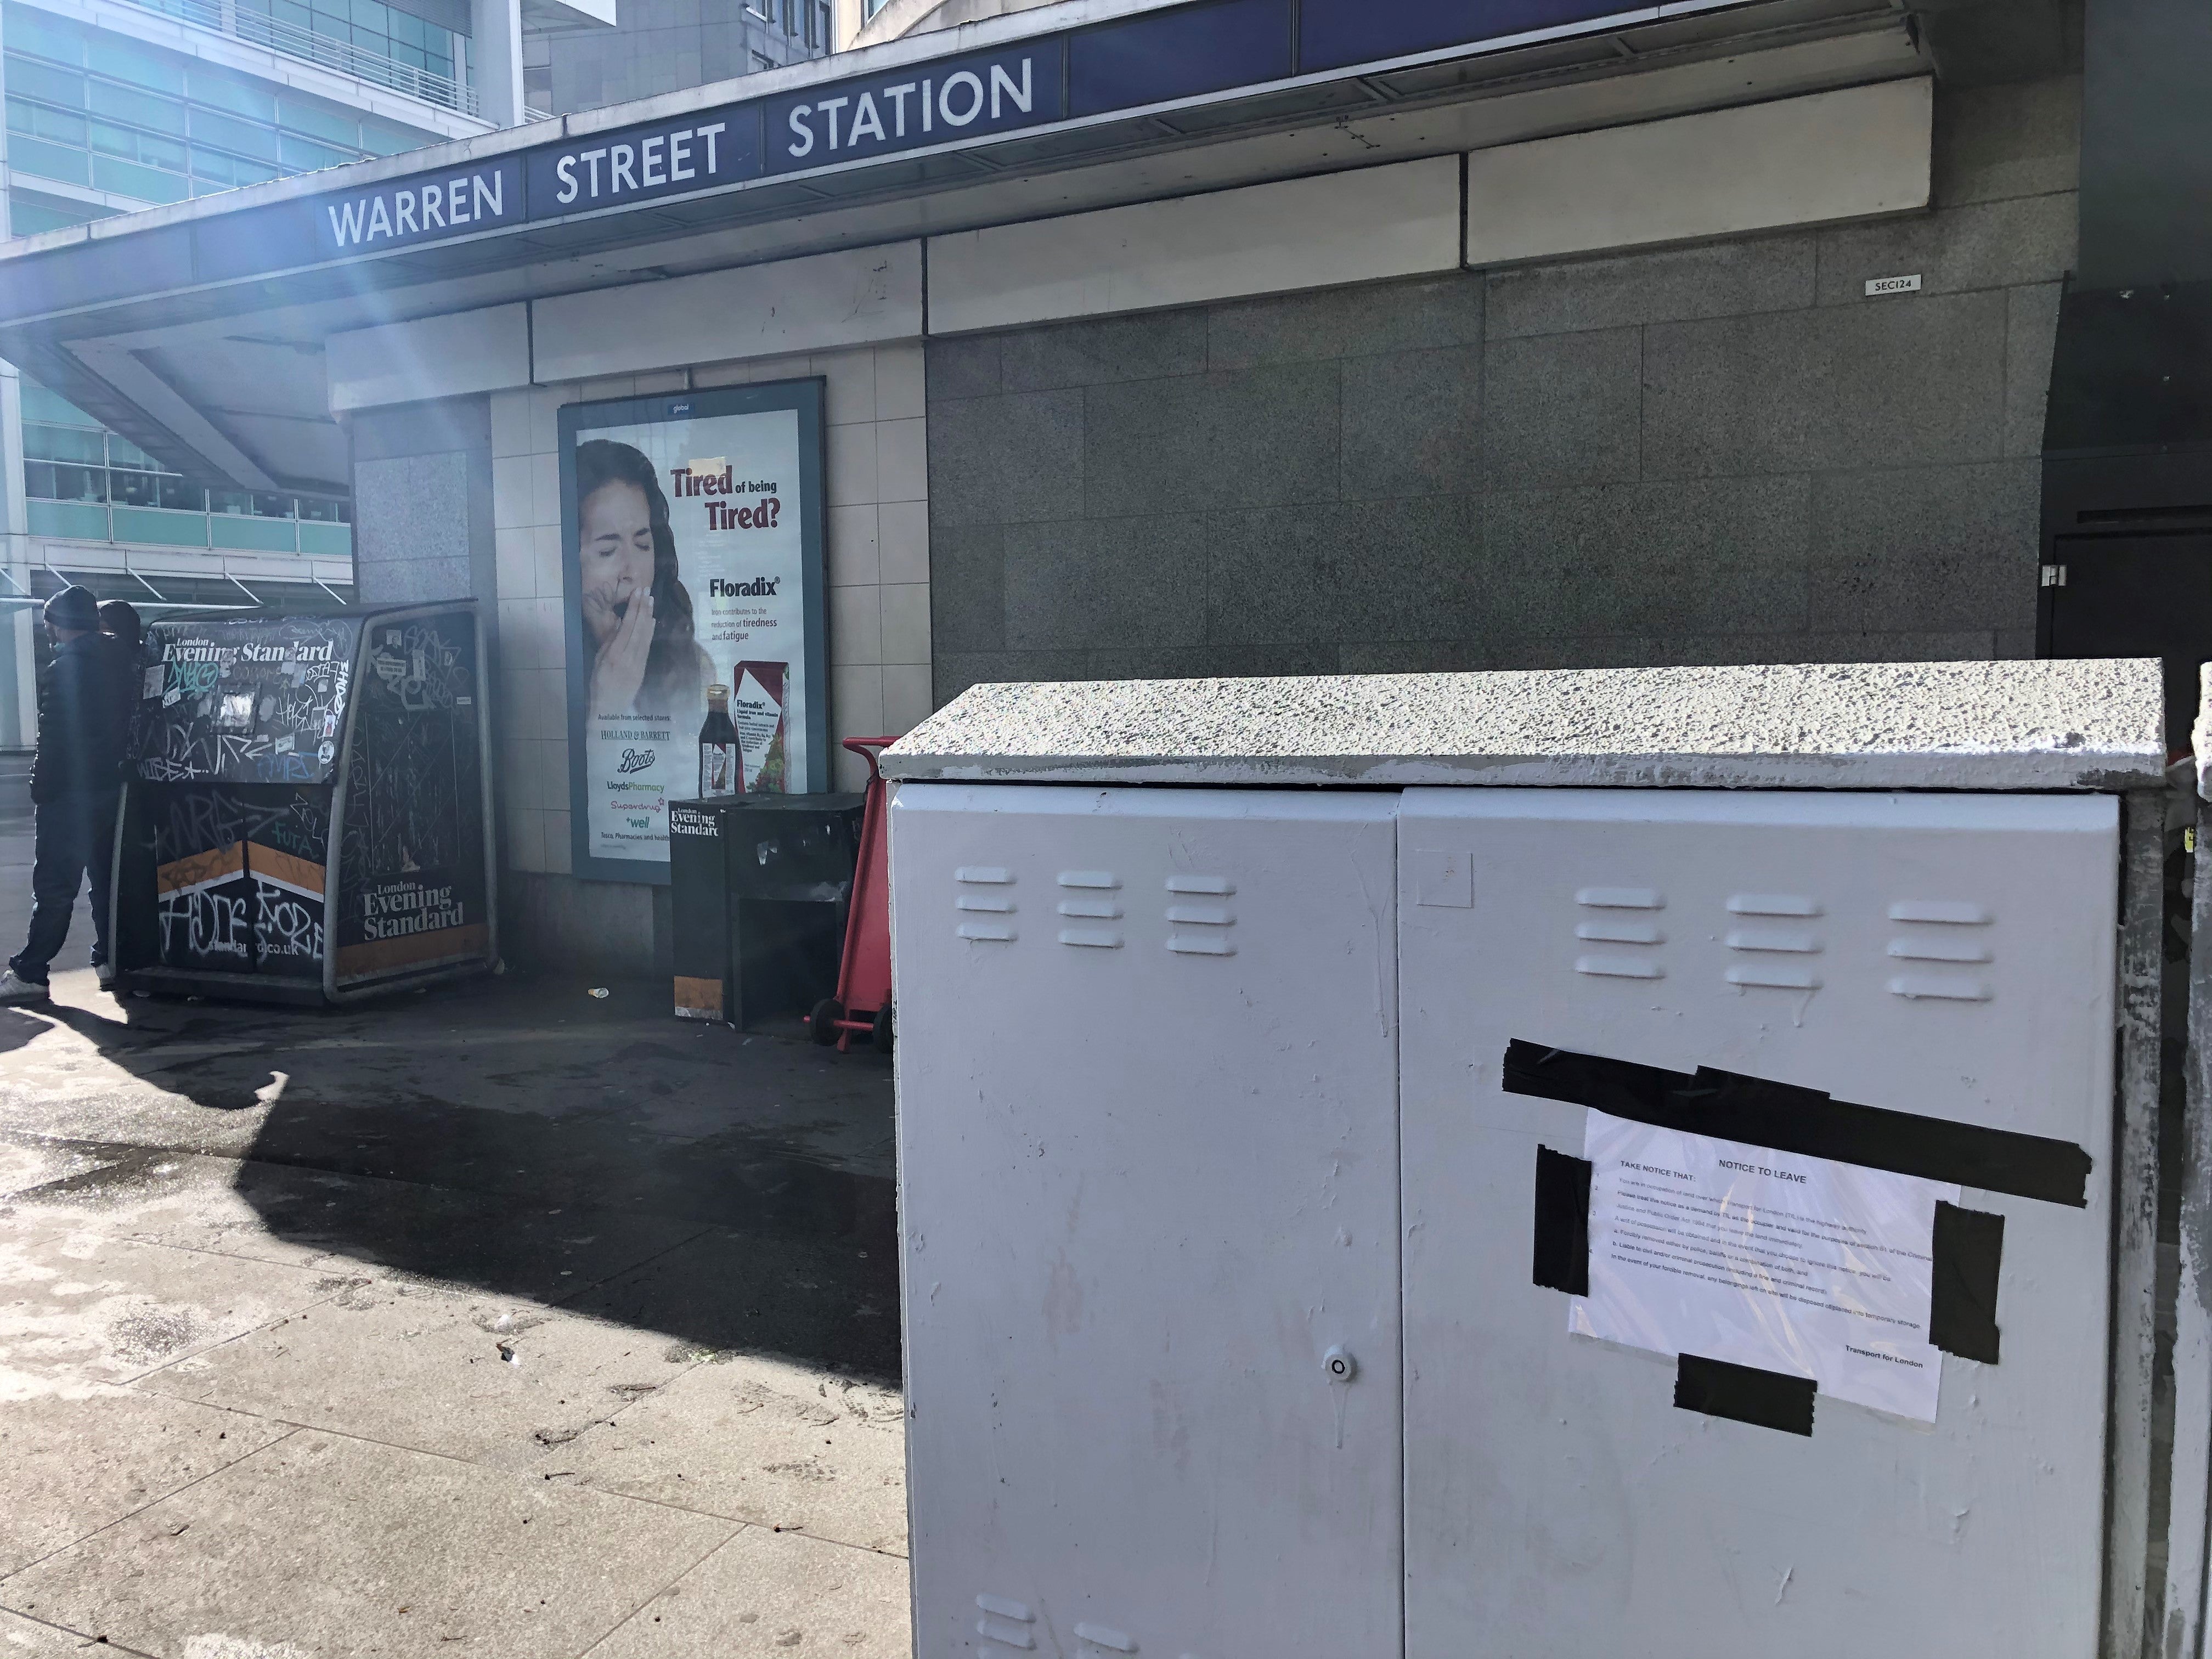 One of the notices was reportedly placed above the bedding space of a pregnant 20-year-old Romanian woman outside Warren Street station